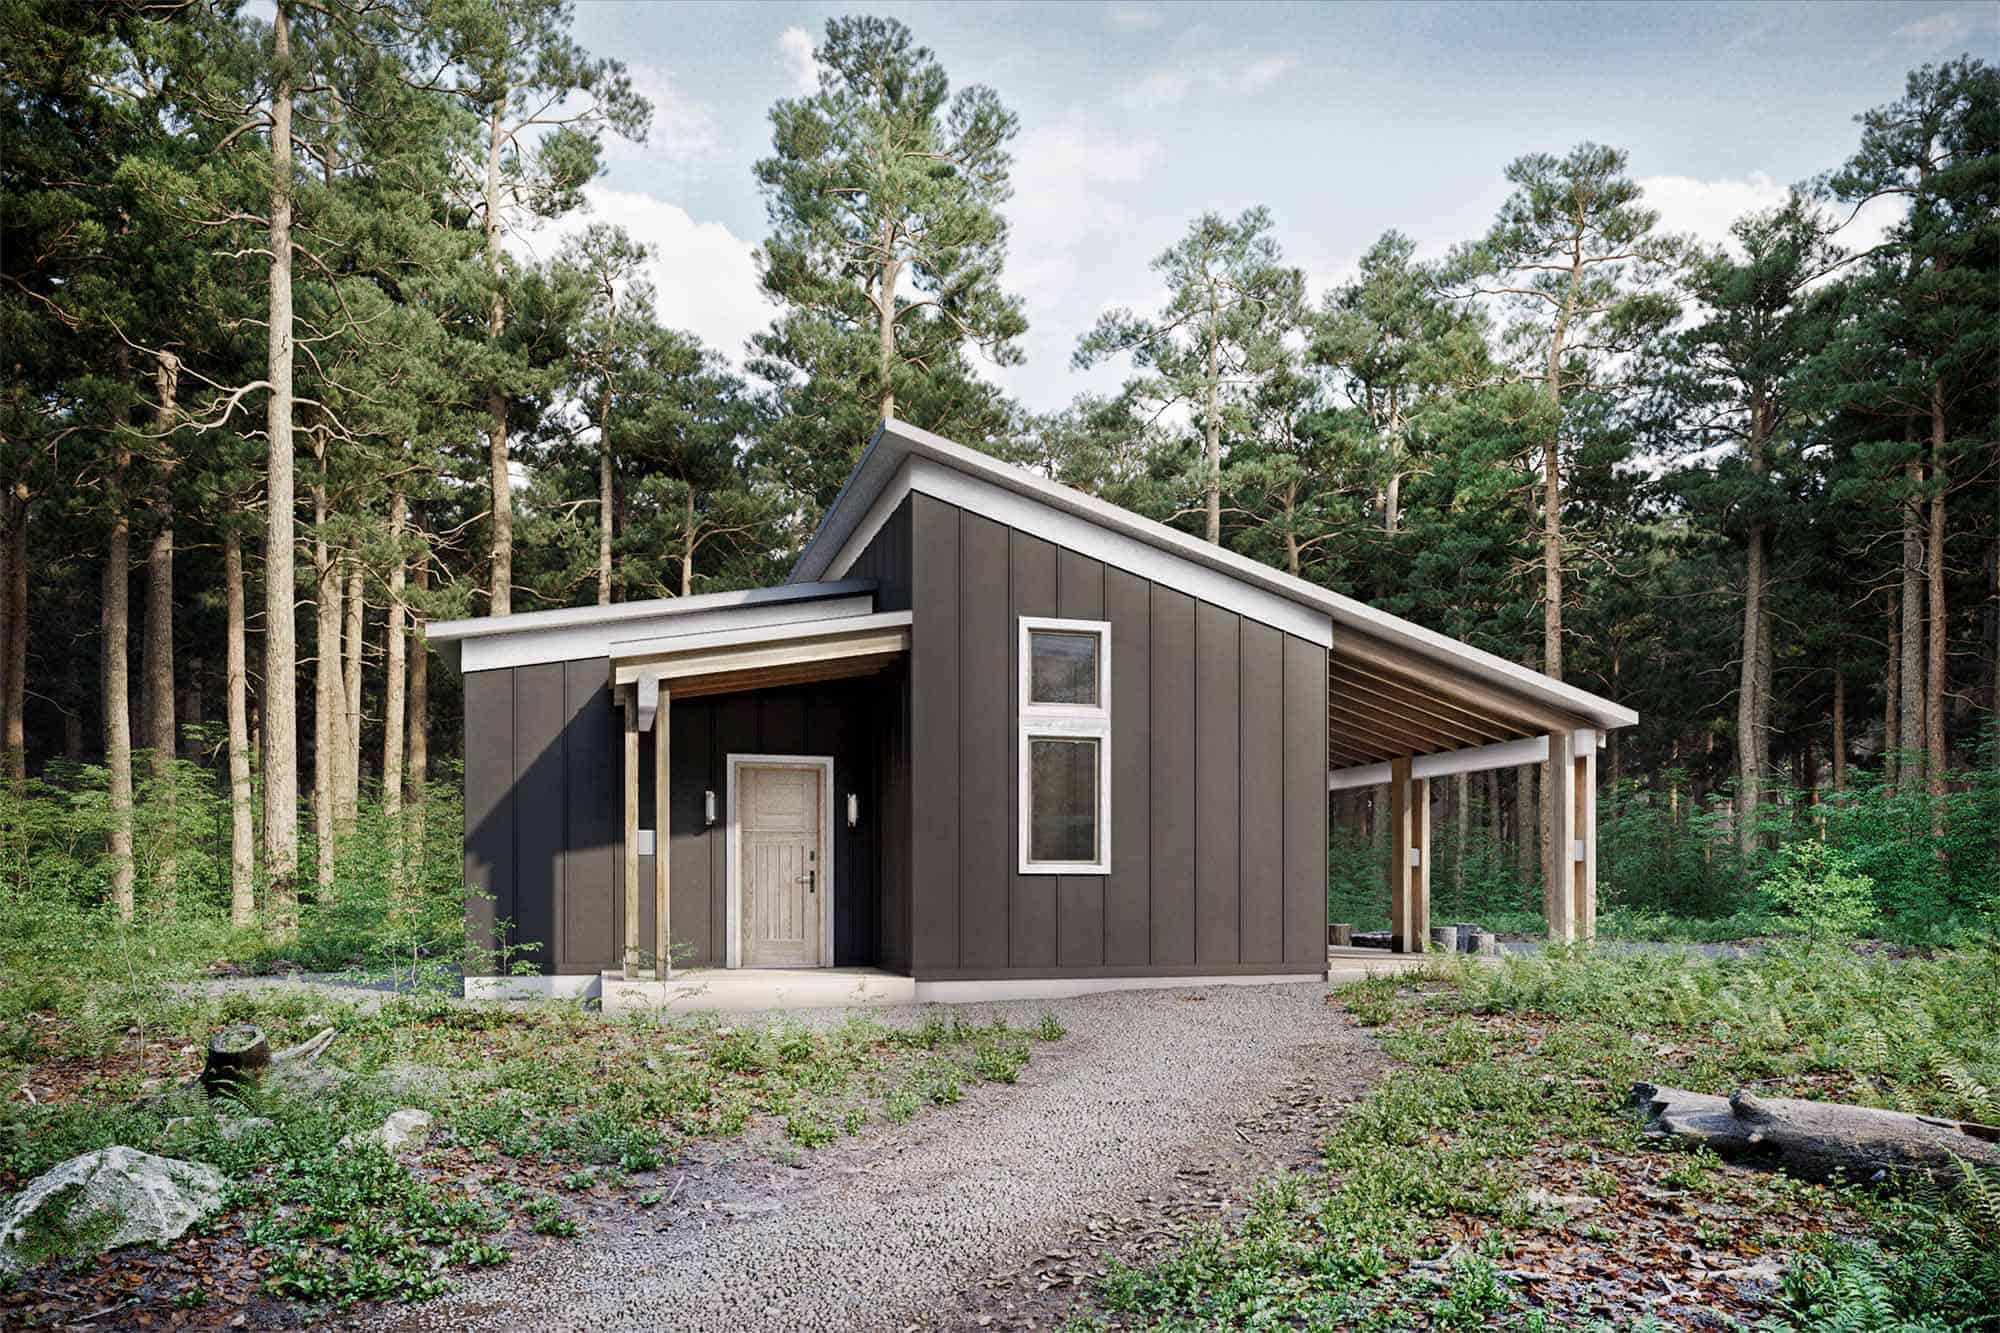 Shed House Plans Functional And